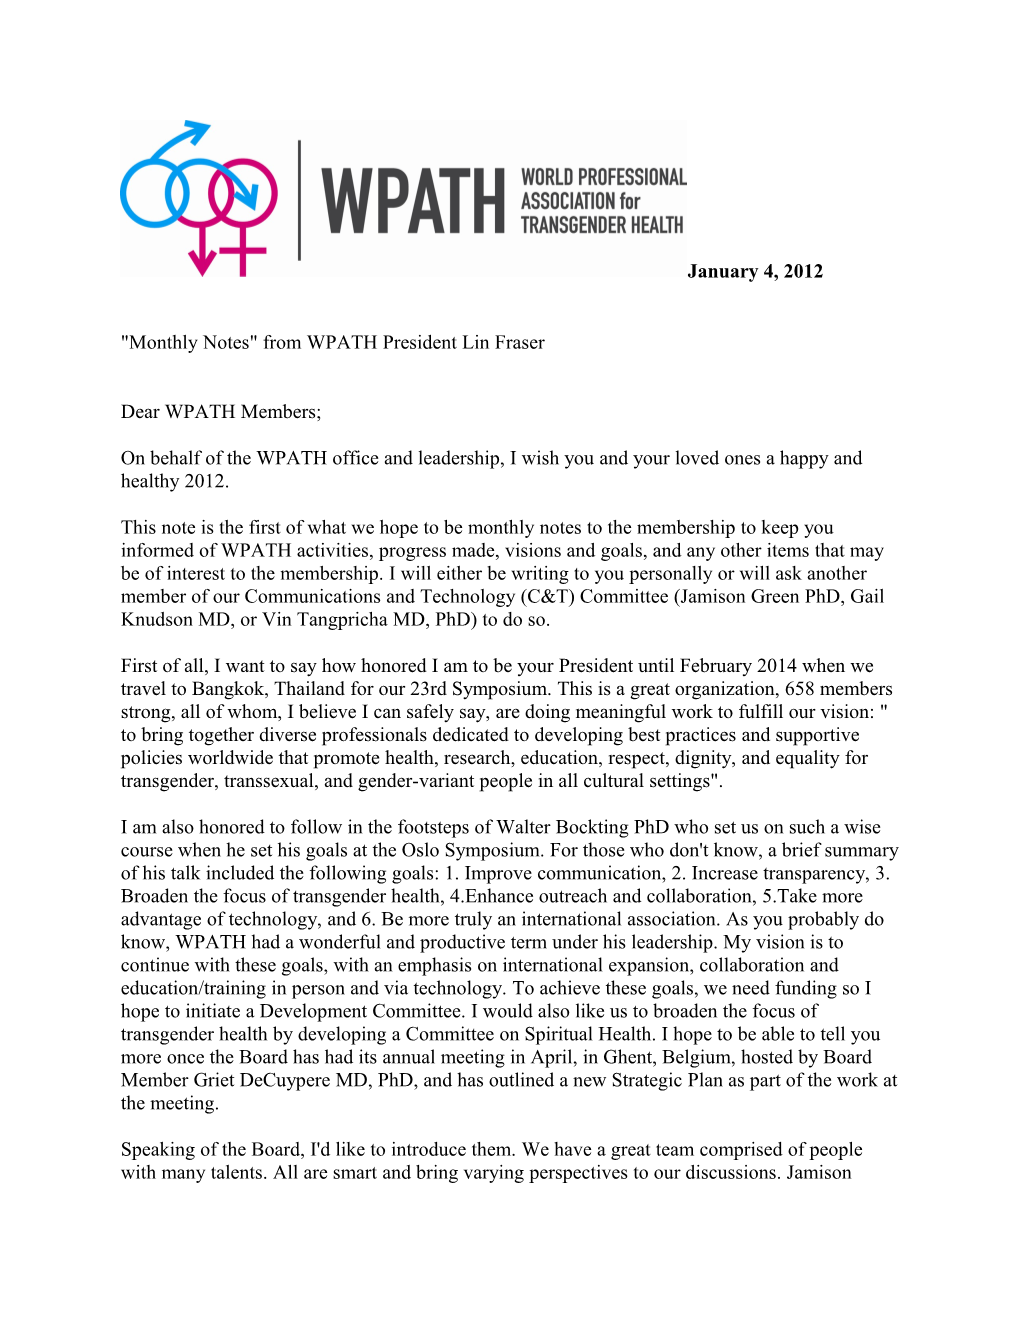 Monthly Notes from WPATH President Lin Fraser